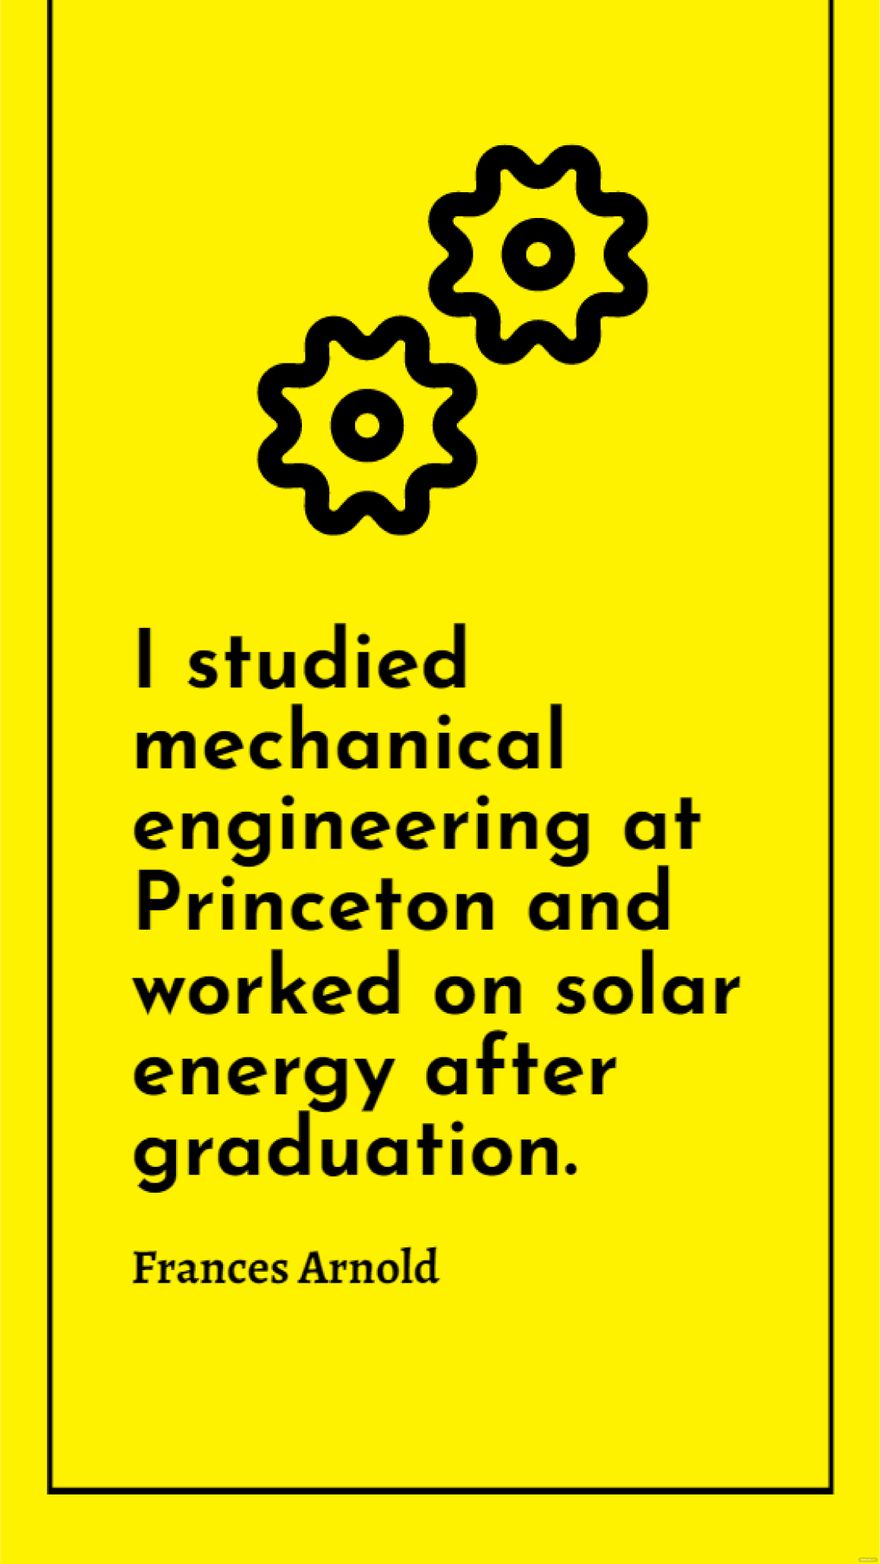 Frances Arnold - I studied mechanical engineering at Princeton and worked on solar energy after graduation.